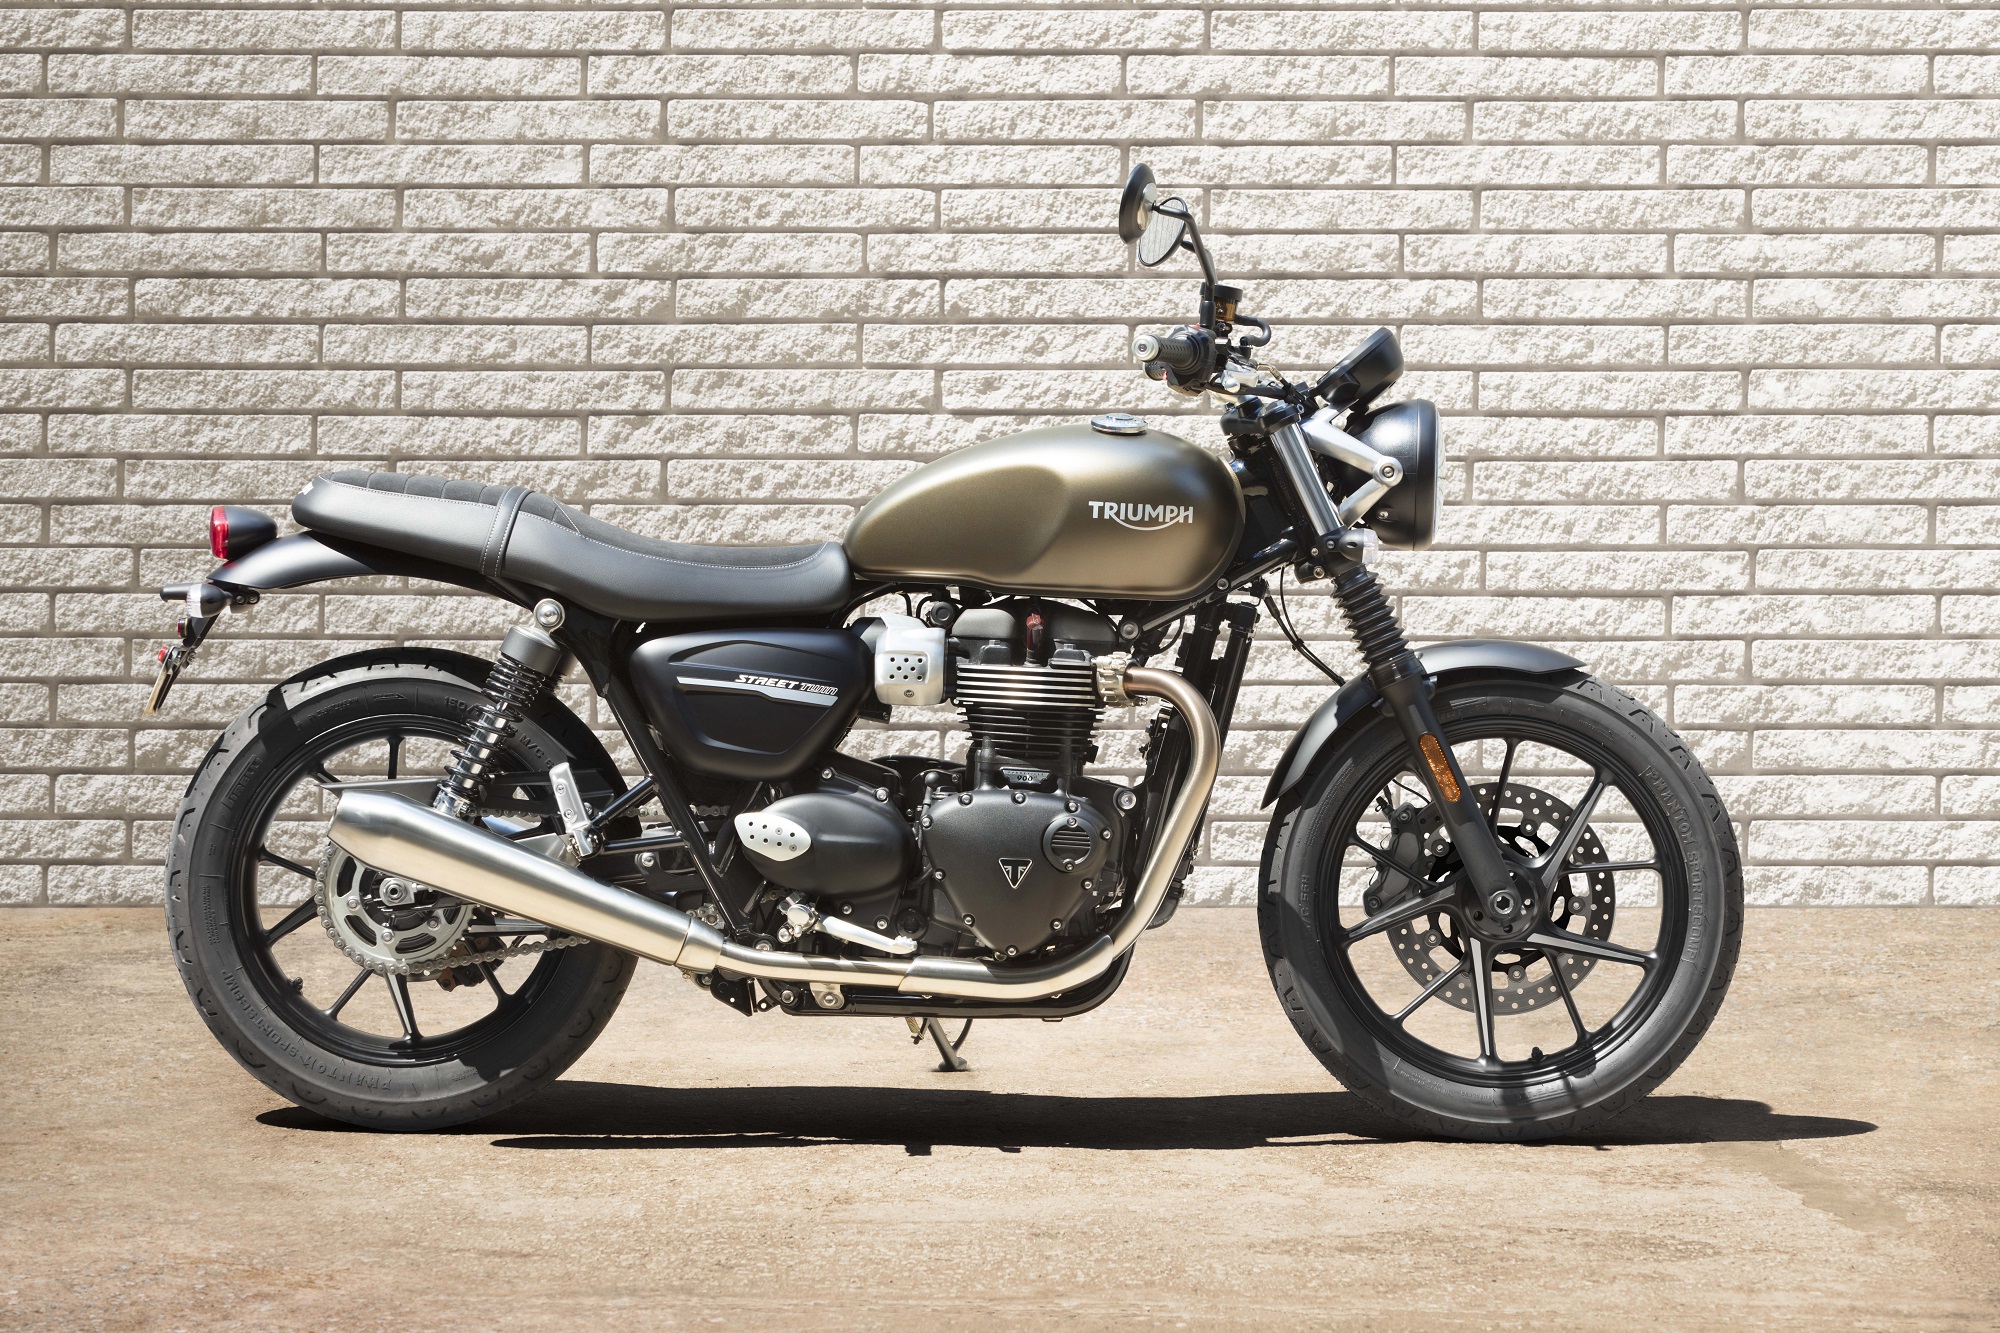 Triumph Motorcycles launches the all-new Street Twin & the new Street Scrambler